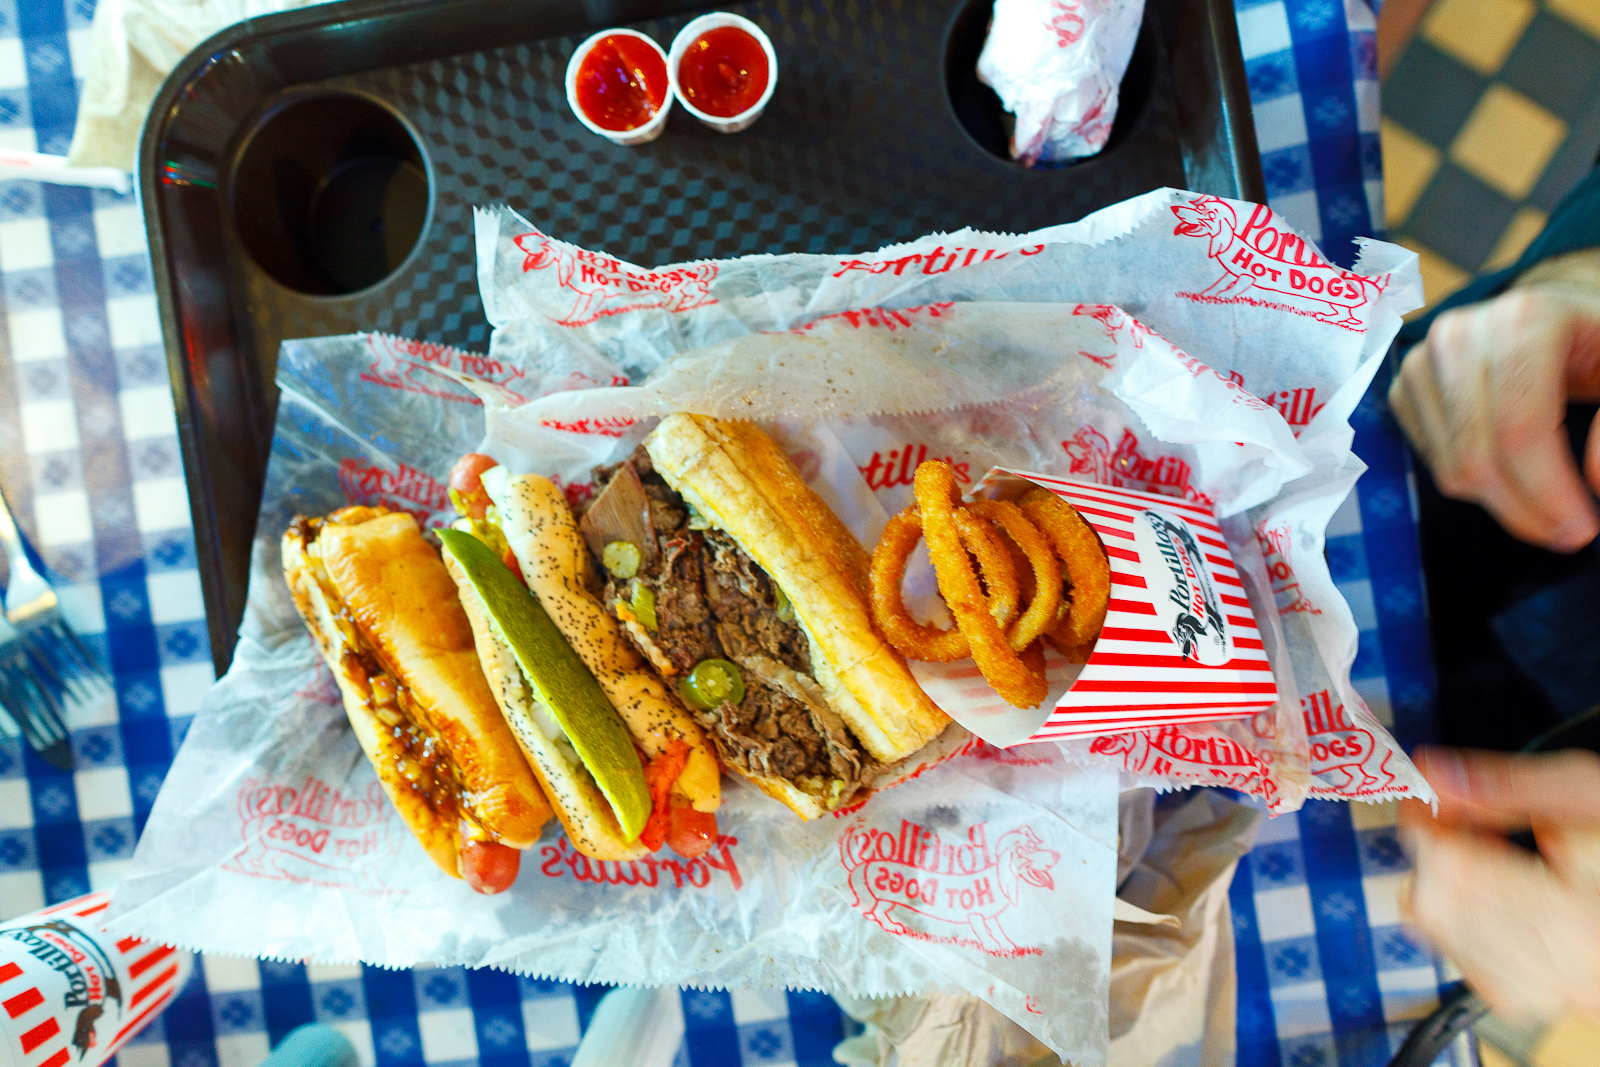 Chili cheese dog, hot dog with everything, Italian beef sandwich, onion rings